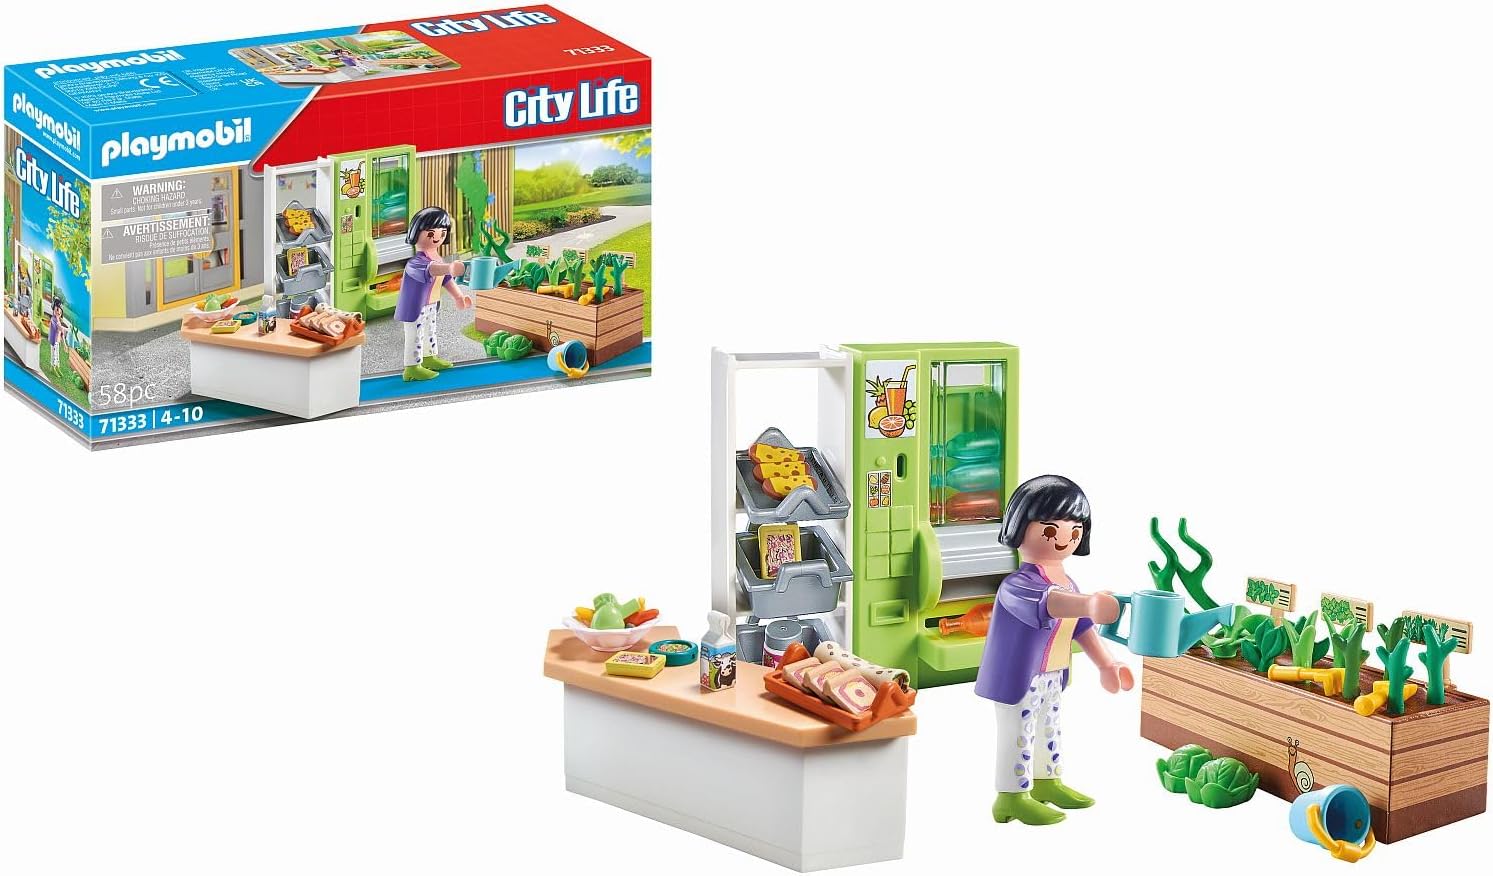 PLAYMOBIL City Life 71333 School Kiosk, Sales Stand, Fillable Bottle Machine, Toy for Children from 4 Years